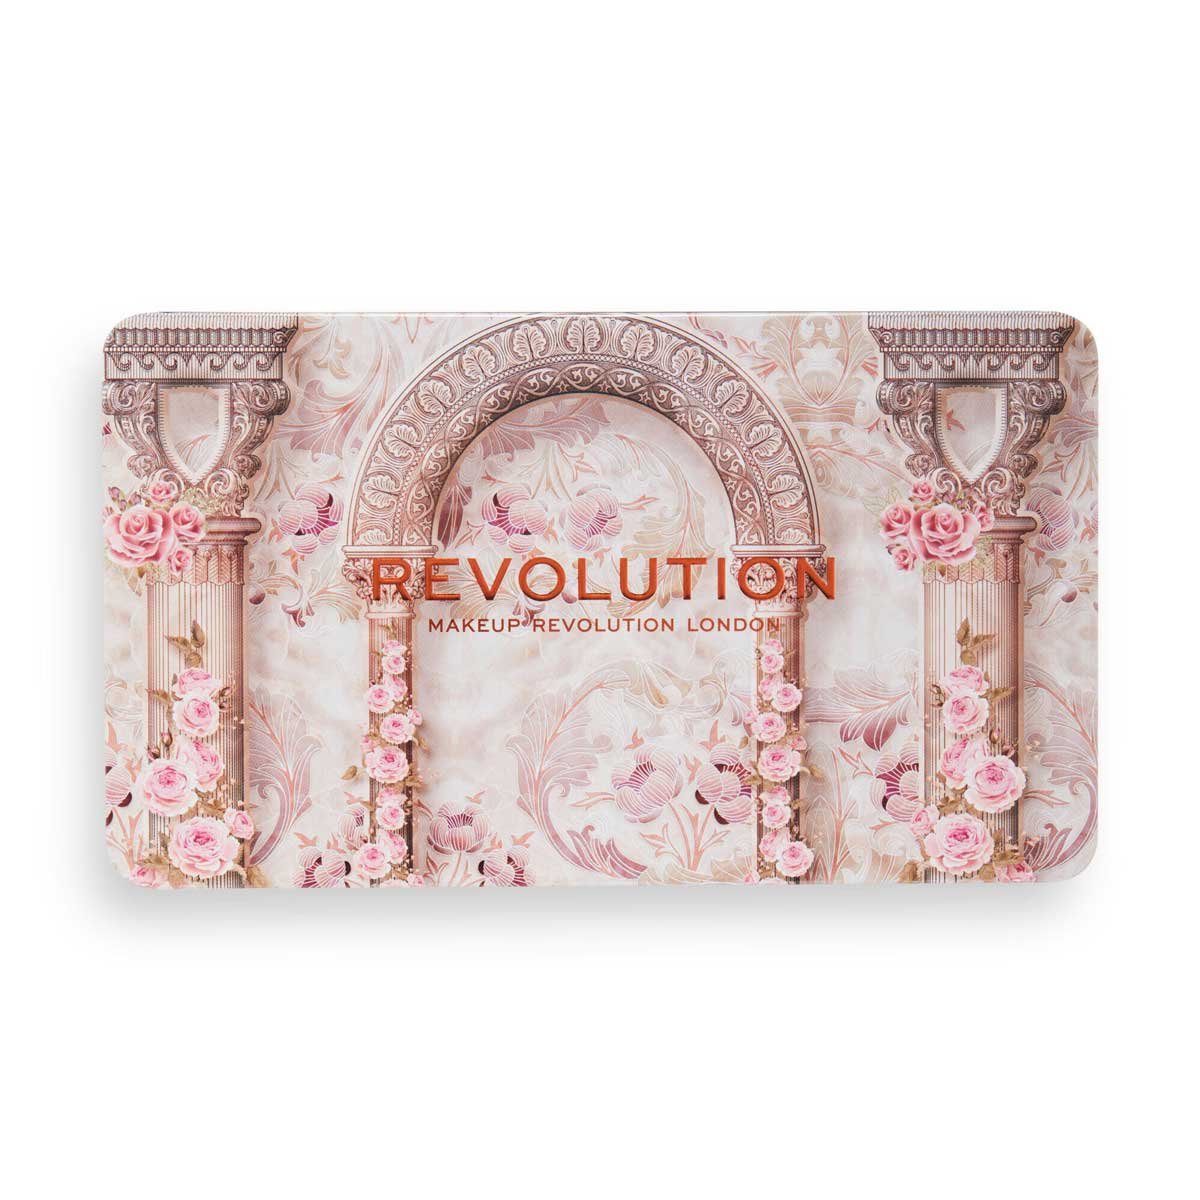 gifts for her the make up lover eye shaddow palette - Makeup Revolution Forever Flawless Regal Romance Eyeshadow Palette, ncluding mothers, sisters, wives, work colleagues, friends, team members